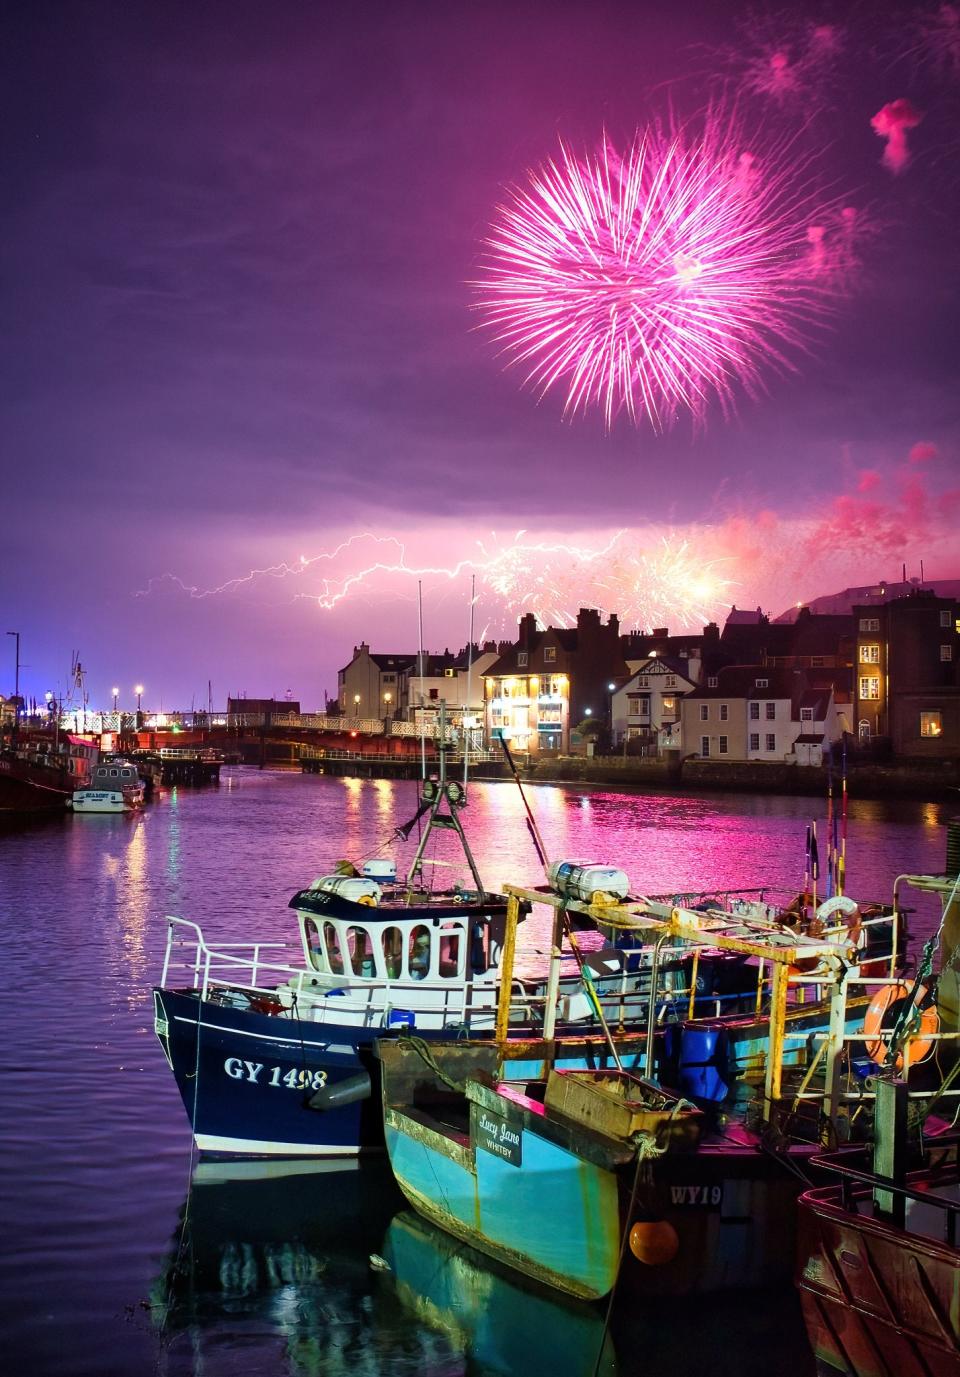 Whitby Harbour on Monday: What a night for a show of lights (David Kirtlan/SWNS)